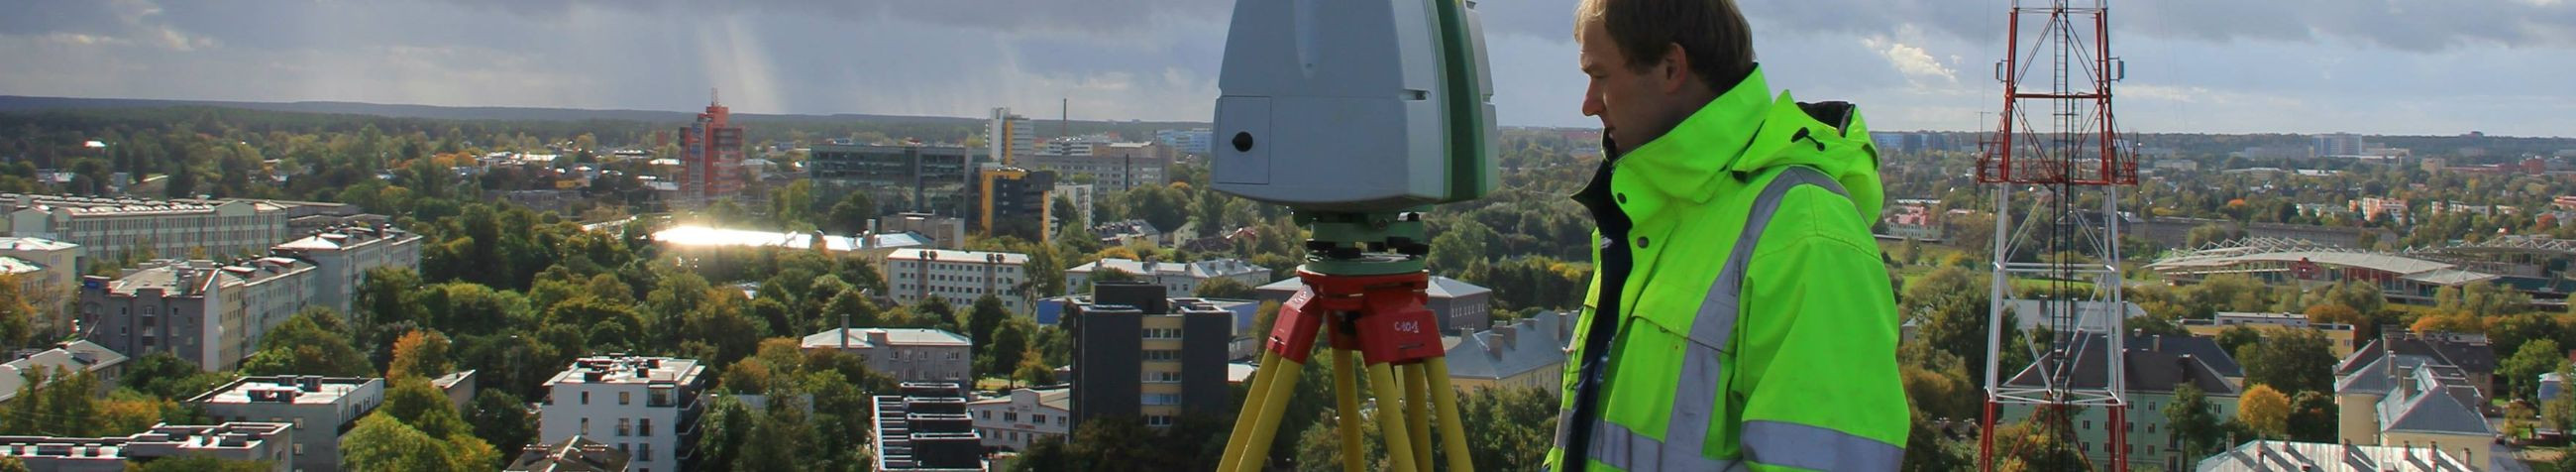 We provide comprehensive geodesy and laser scanning services, ensuring accuracy and quality in every measurement.